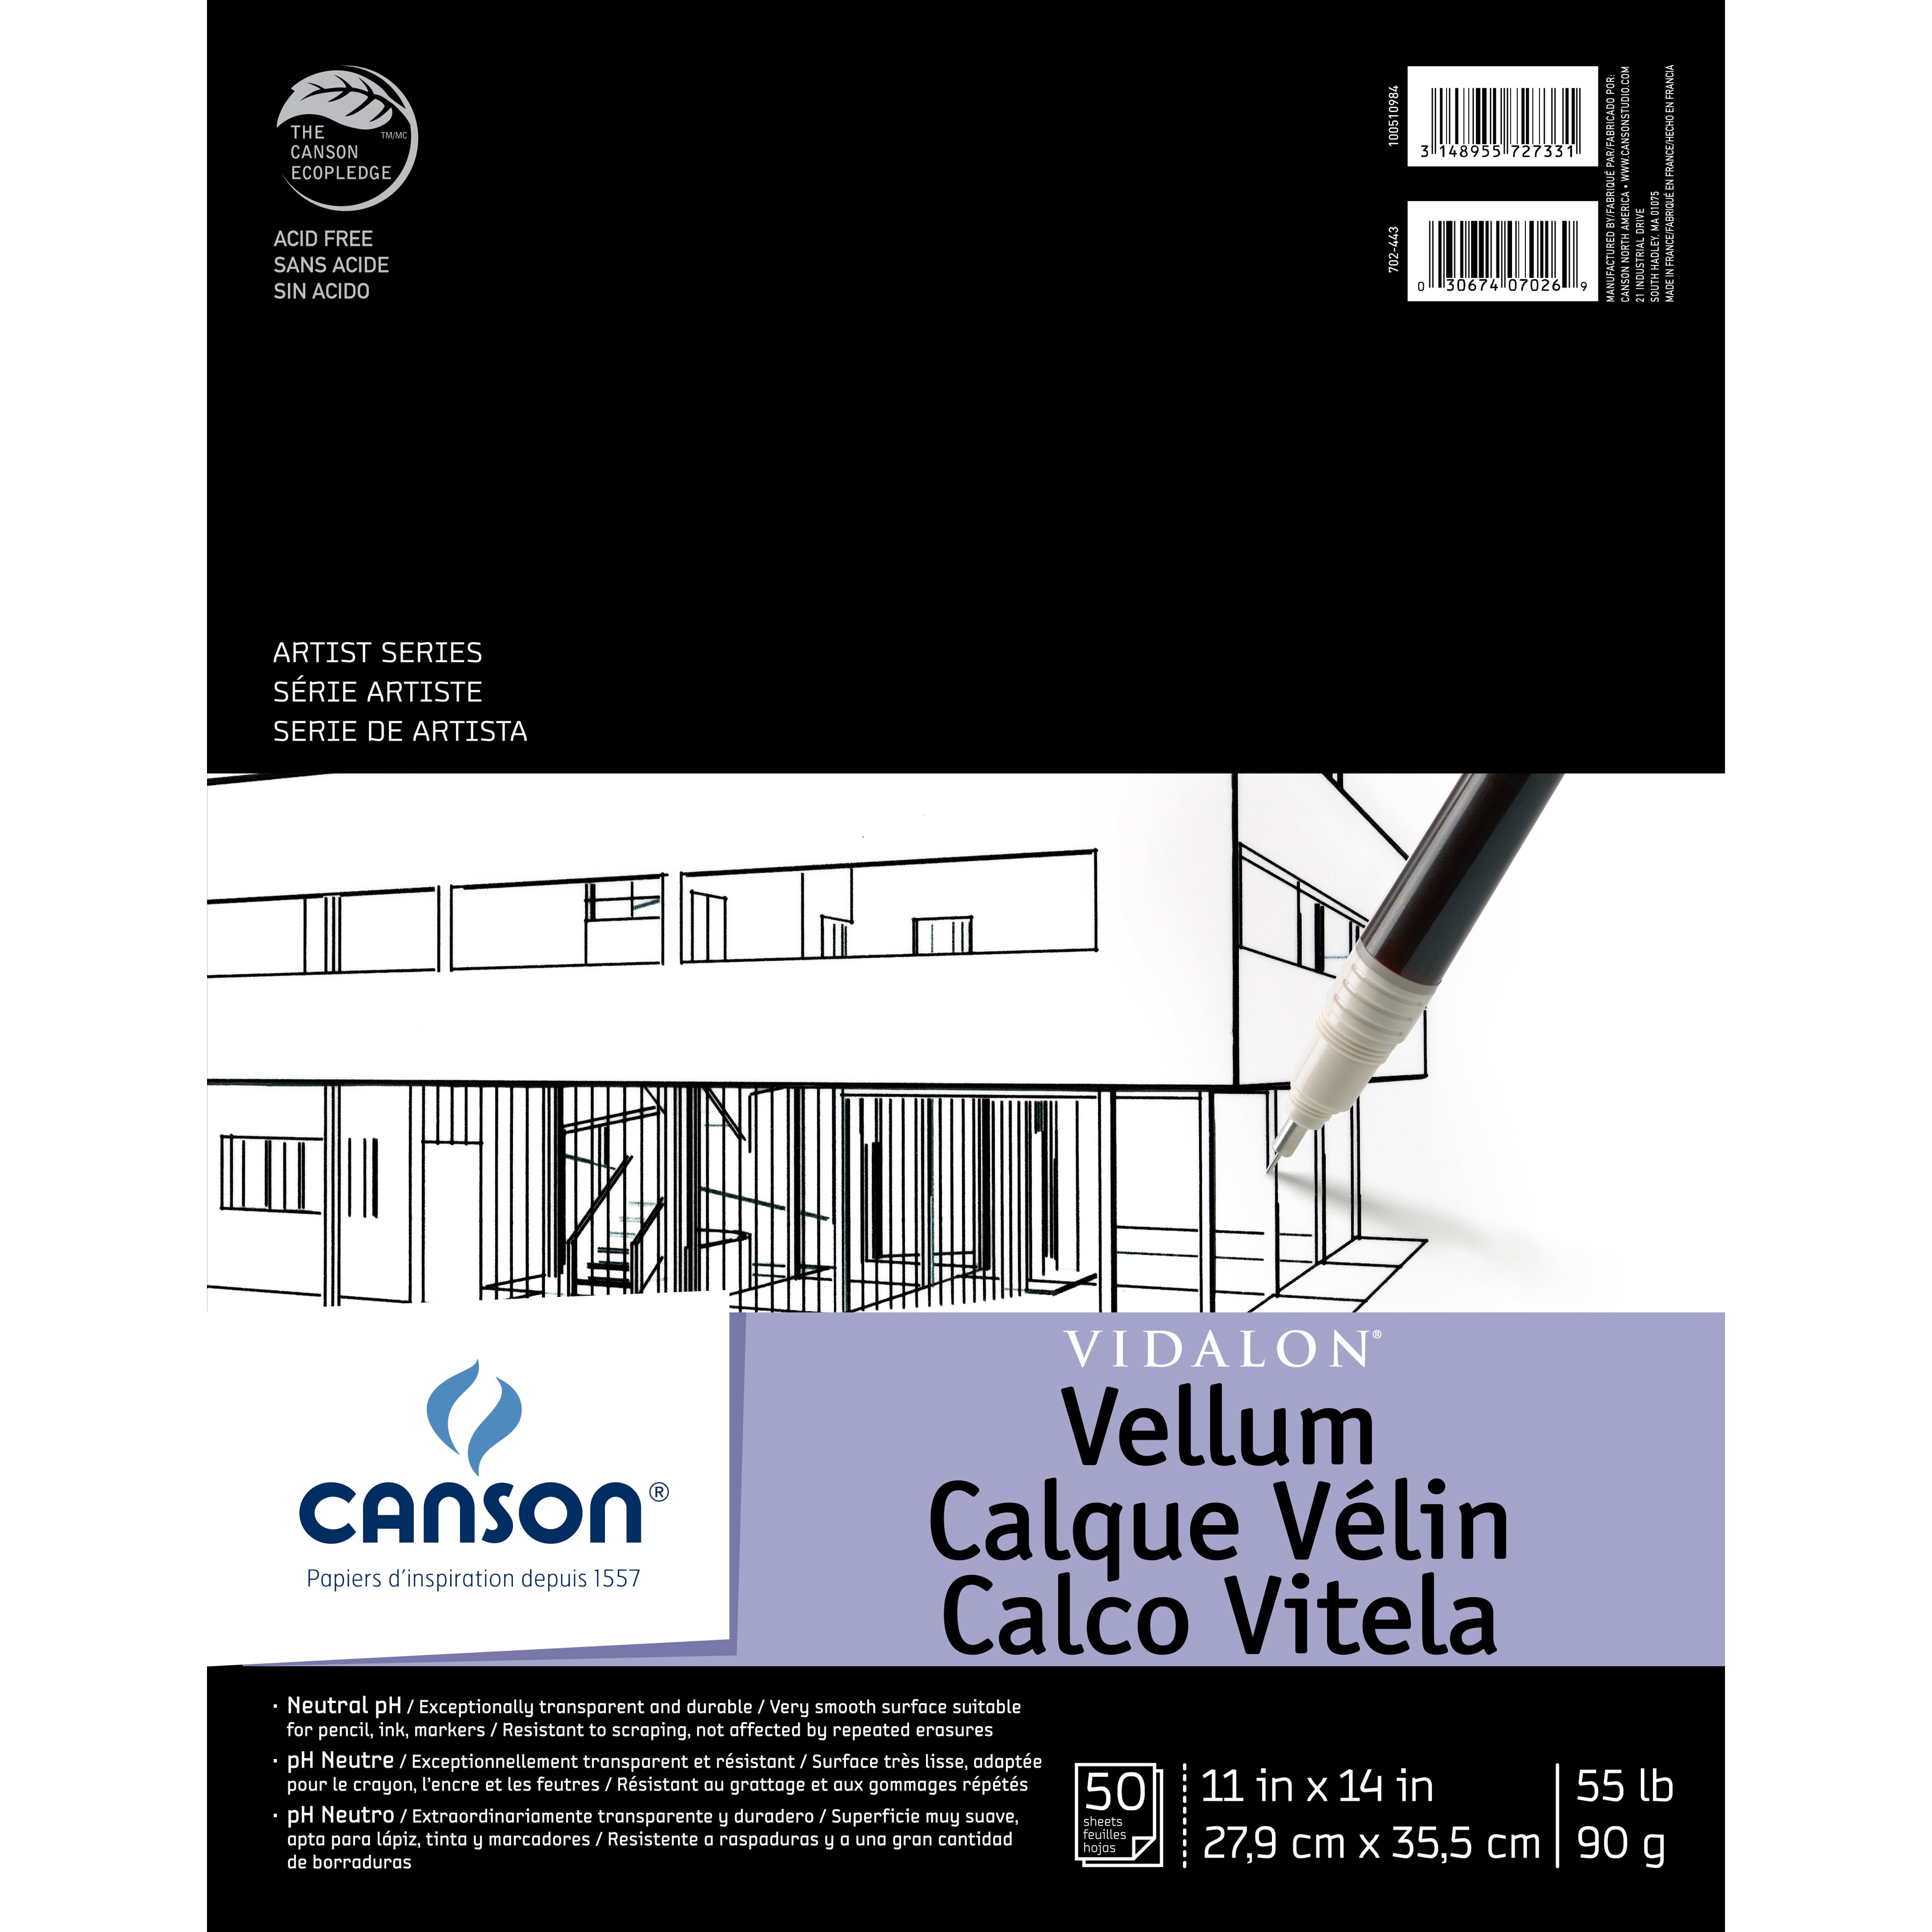 Canson Tracing Paper Pad 19x24" 50 sheets